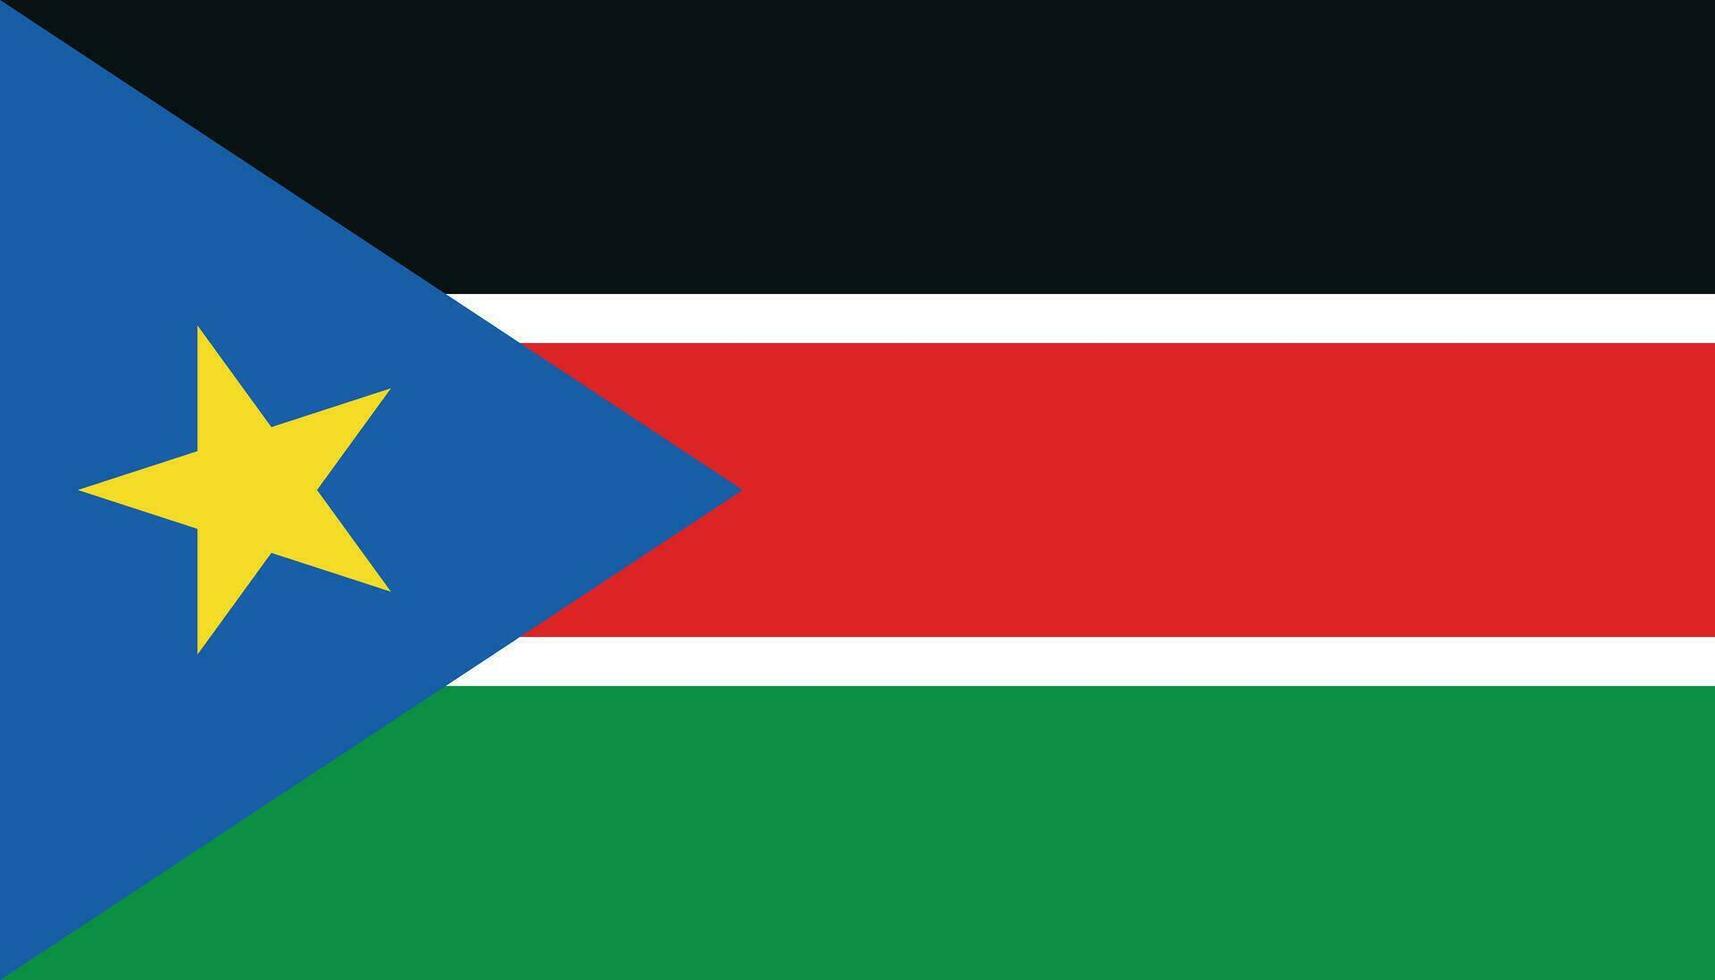 South Sudan flag icon in flat style. National sign vector illustration. Politic business concept.